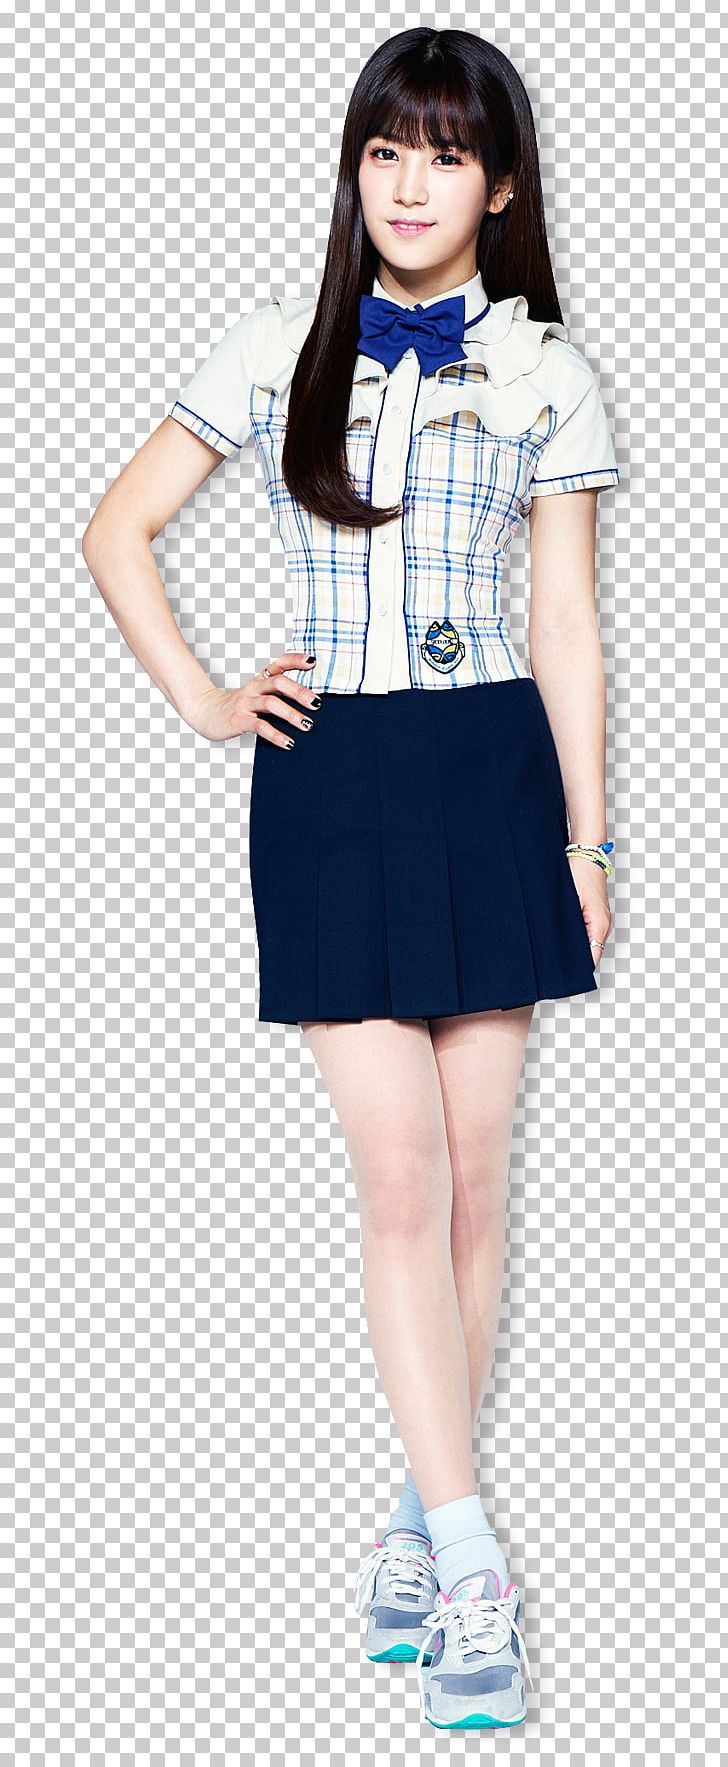 Park Cho-rong Apink Reply 1997 Plan A Entertainment Fan Club PNG, Clipart, Apink, Blue, Clothing, Costume, Dcinside Free PNG Download